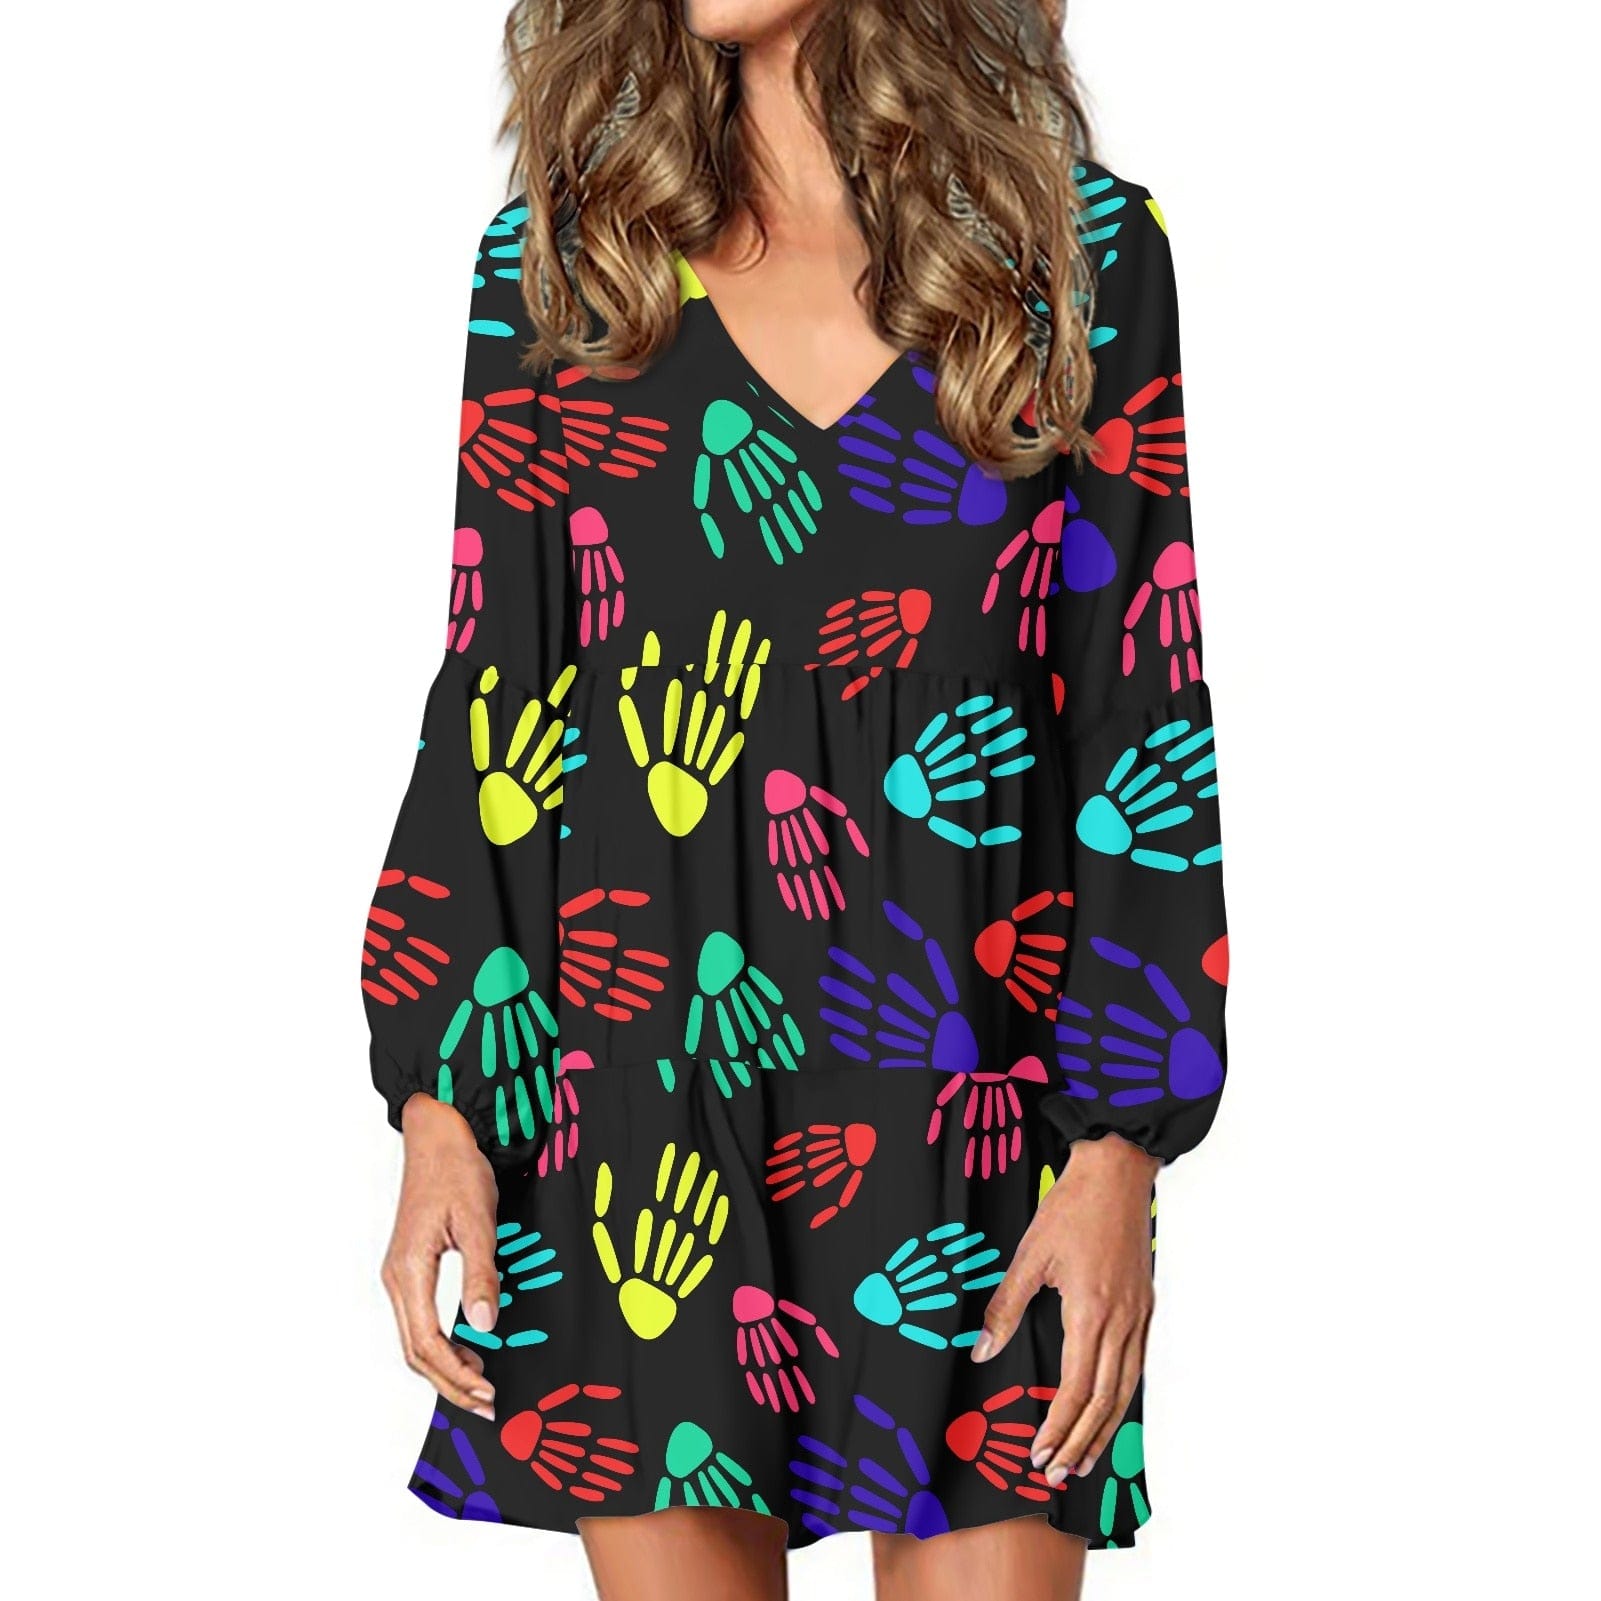 Women’s Skull Pattern V-Neck Loose Beach Dress 14 Patterns to Choose From